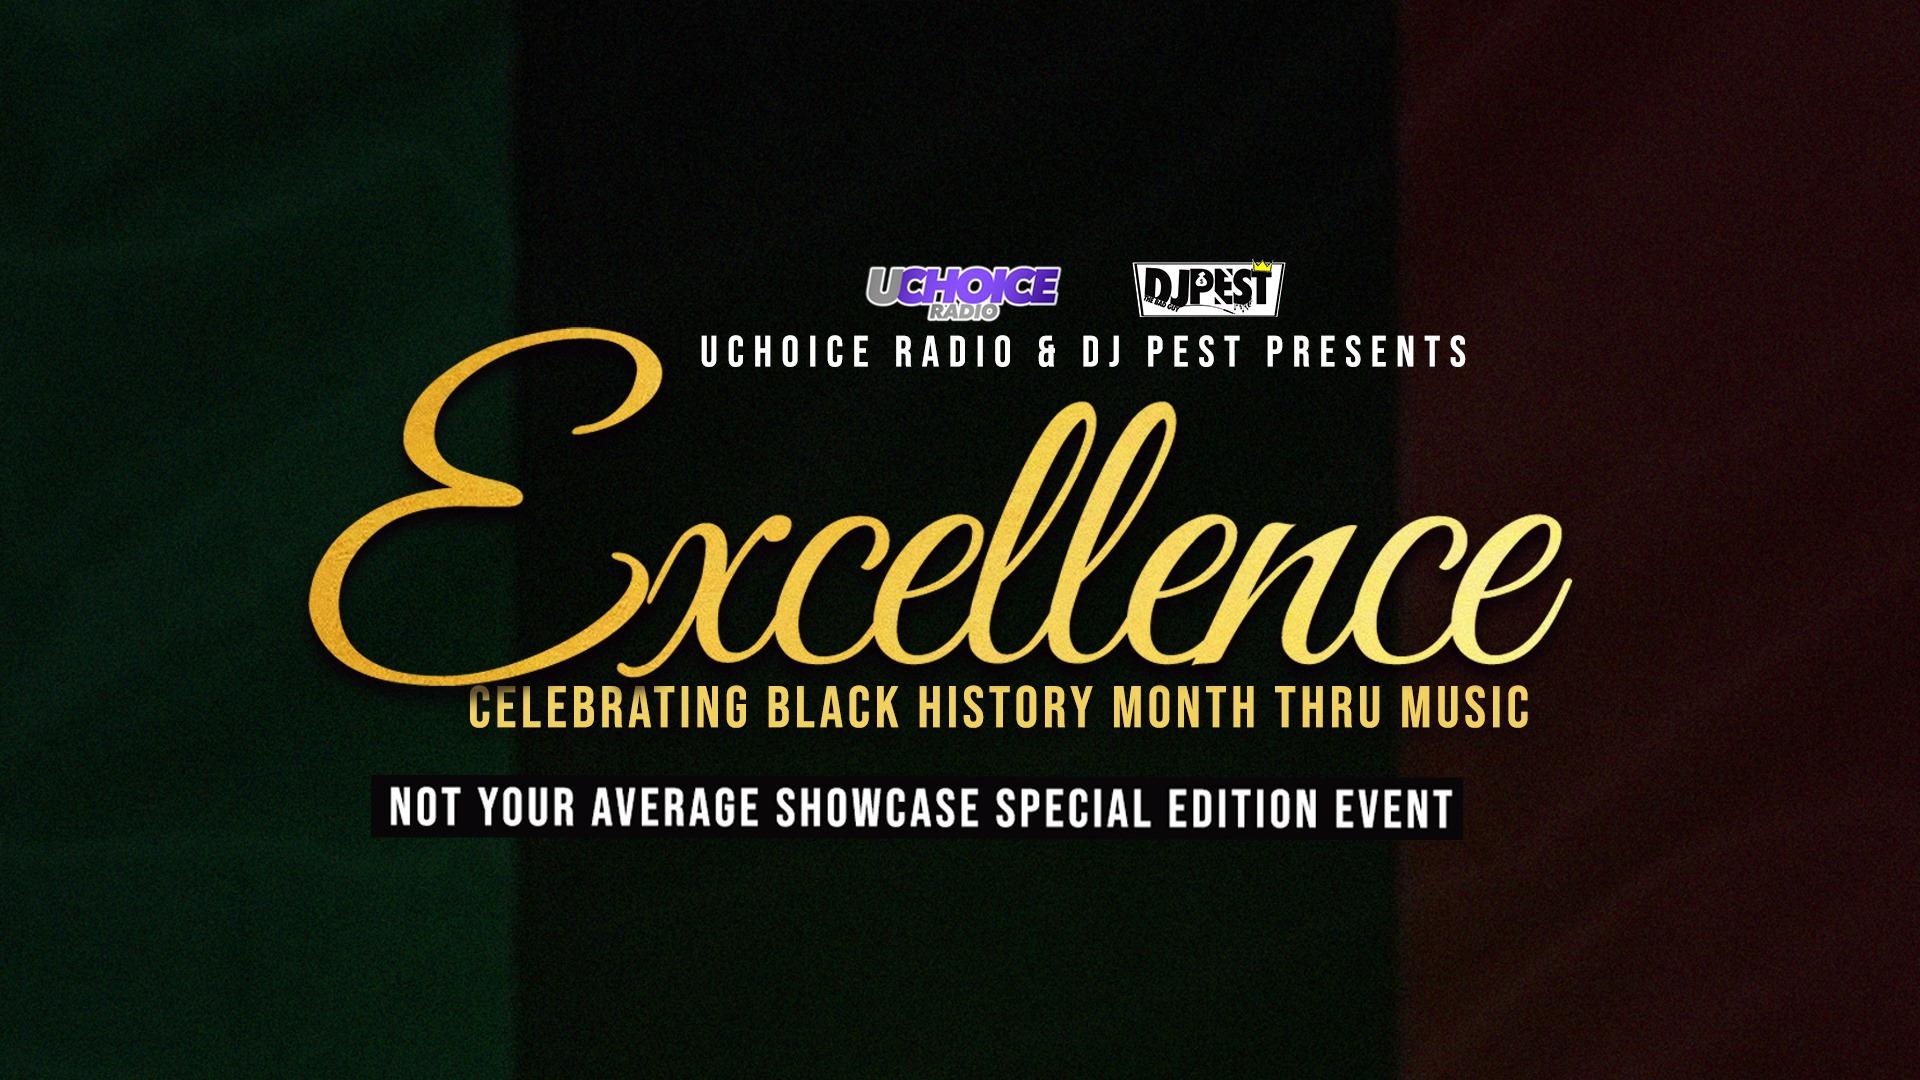 Excellence: Not Your Average Showcase